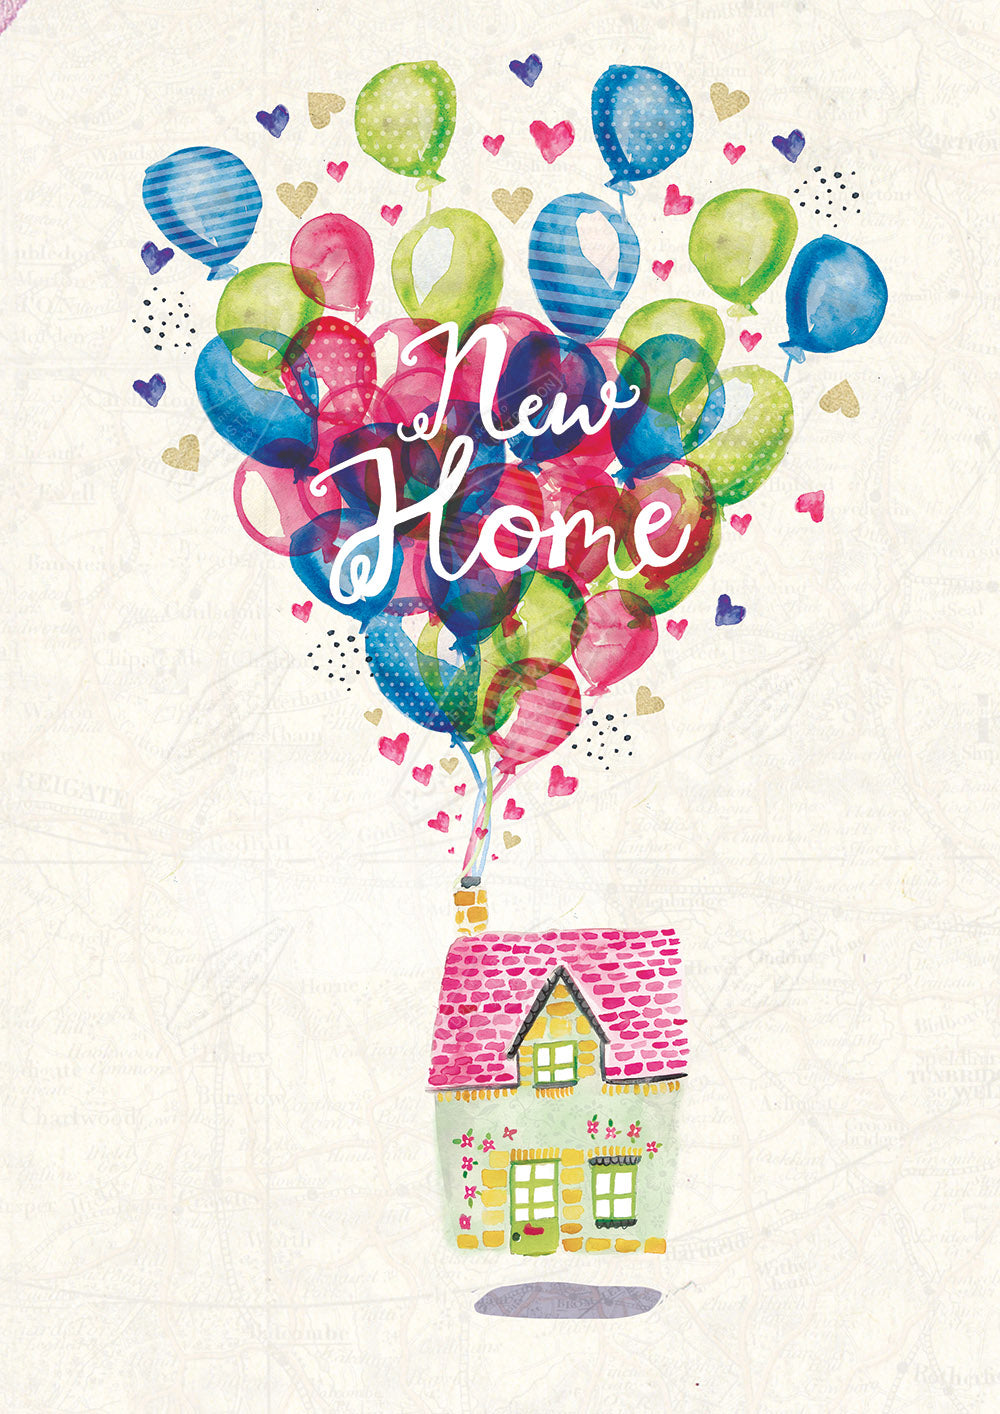 00026911EST- Emily Stalley is represented by Pure Art Licensing Agency - New Home Greeting Card Design